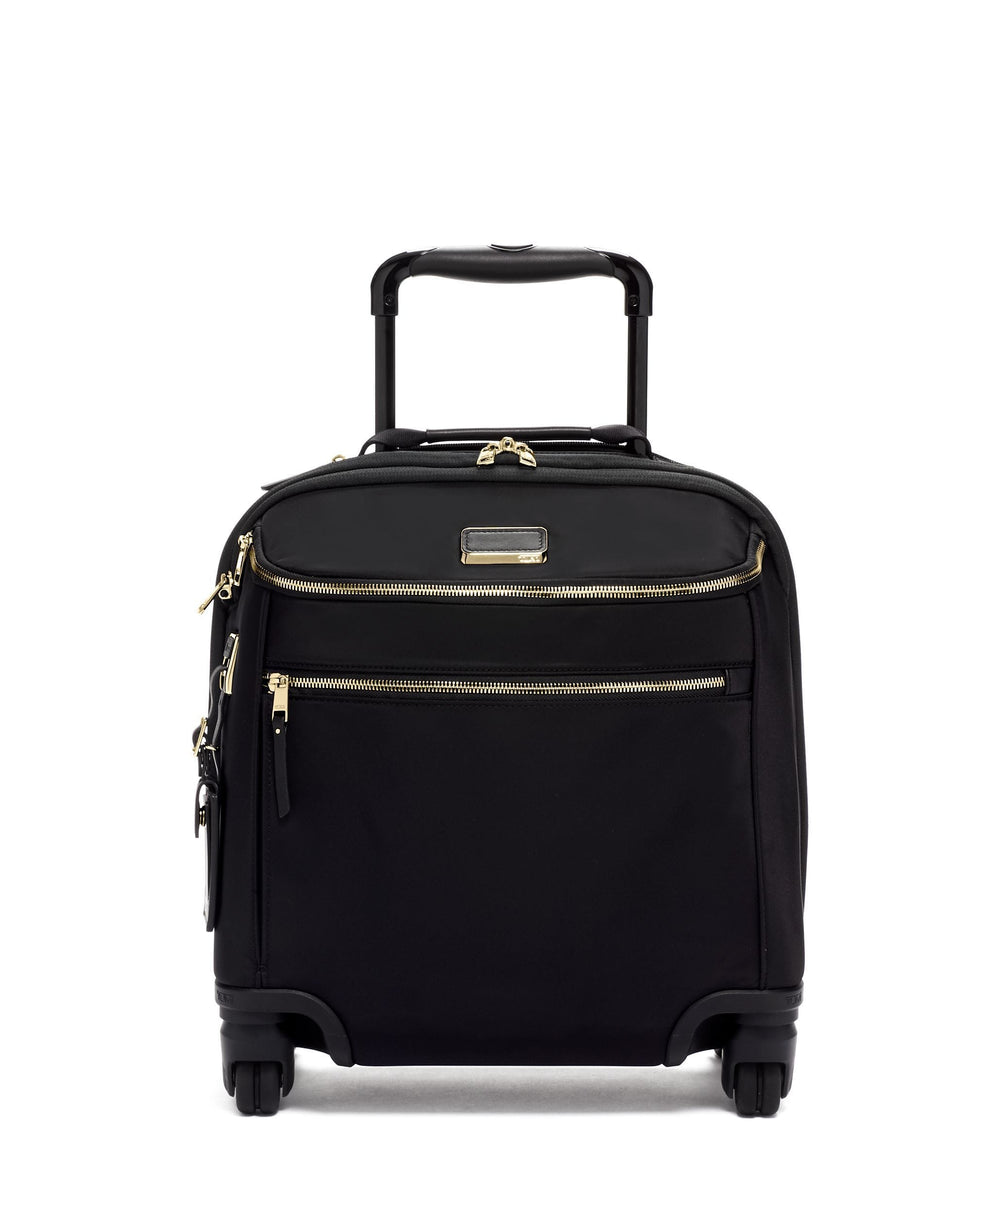 Oxford Compact Carry-on Voyageur Collection